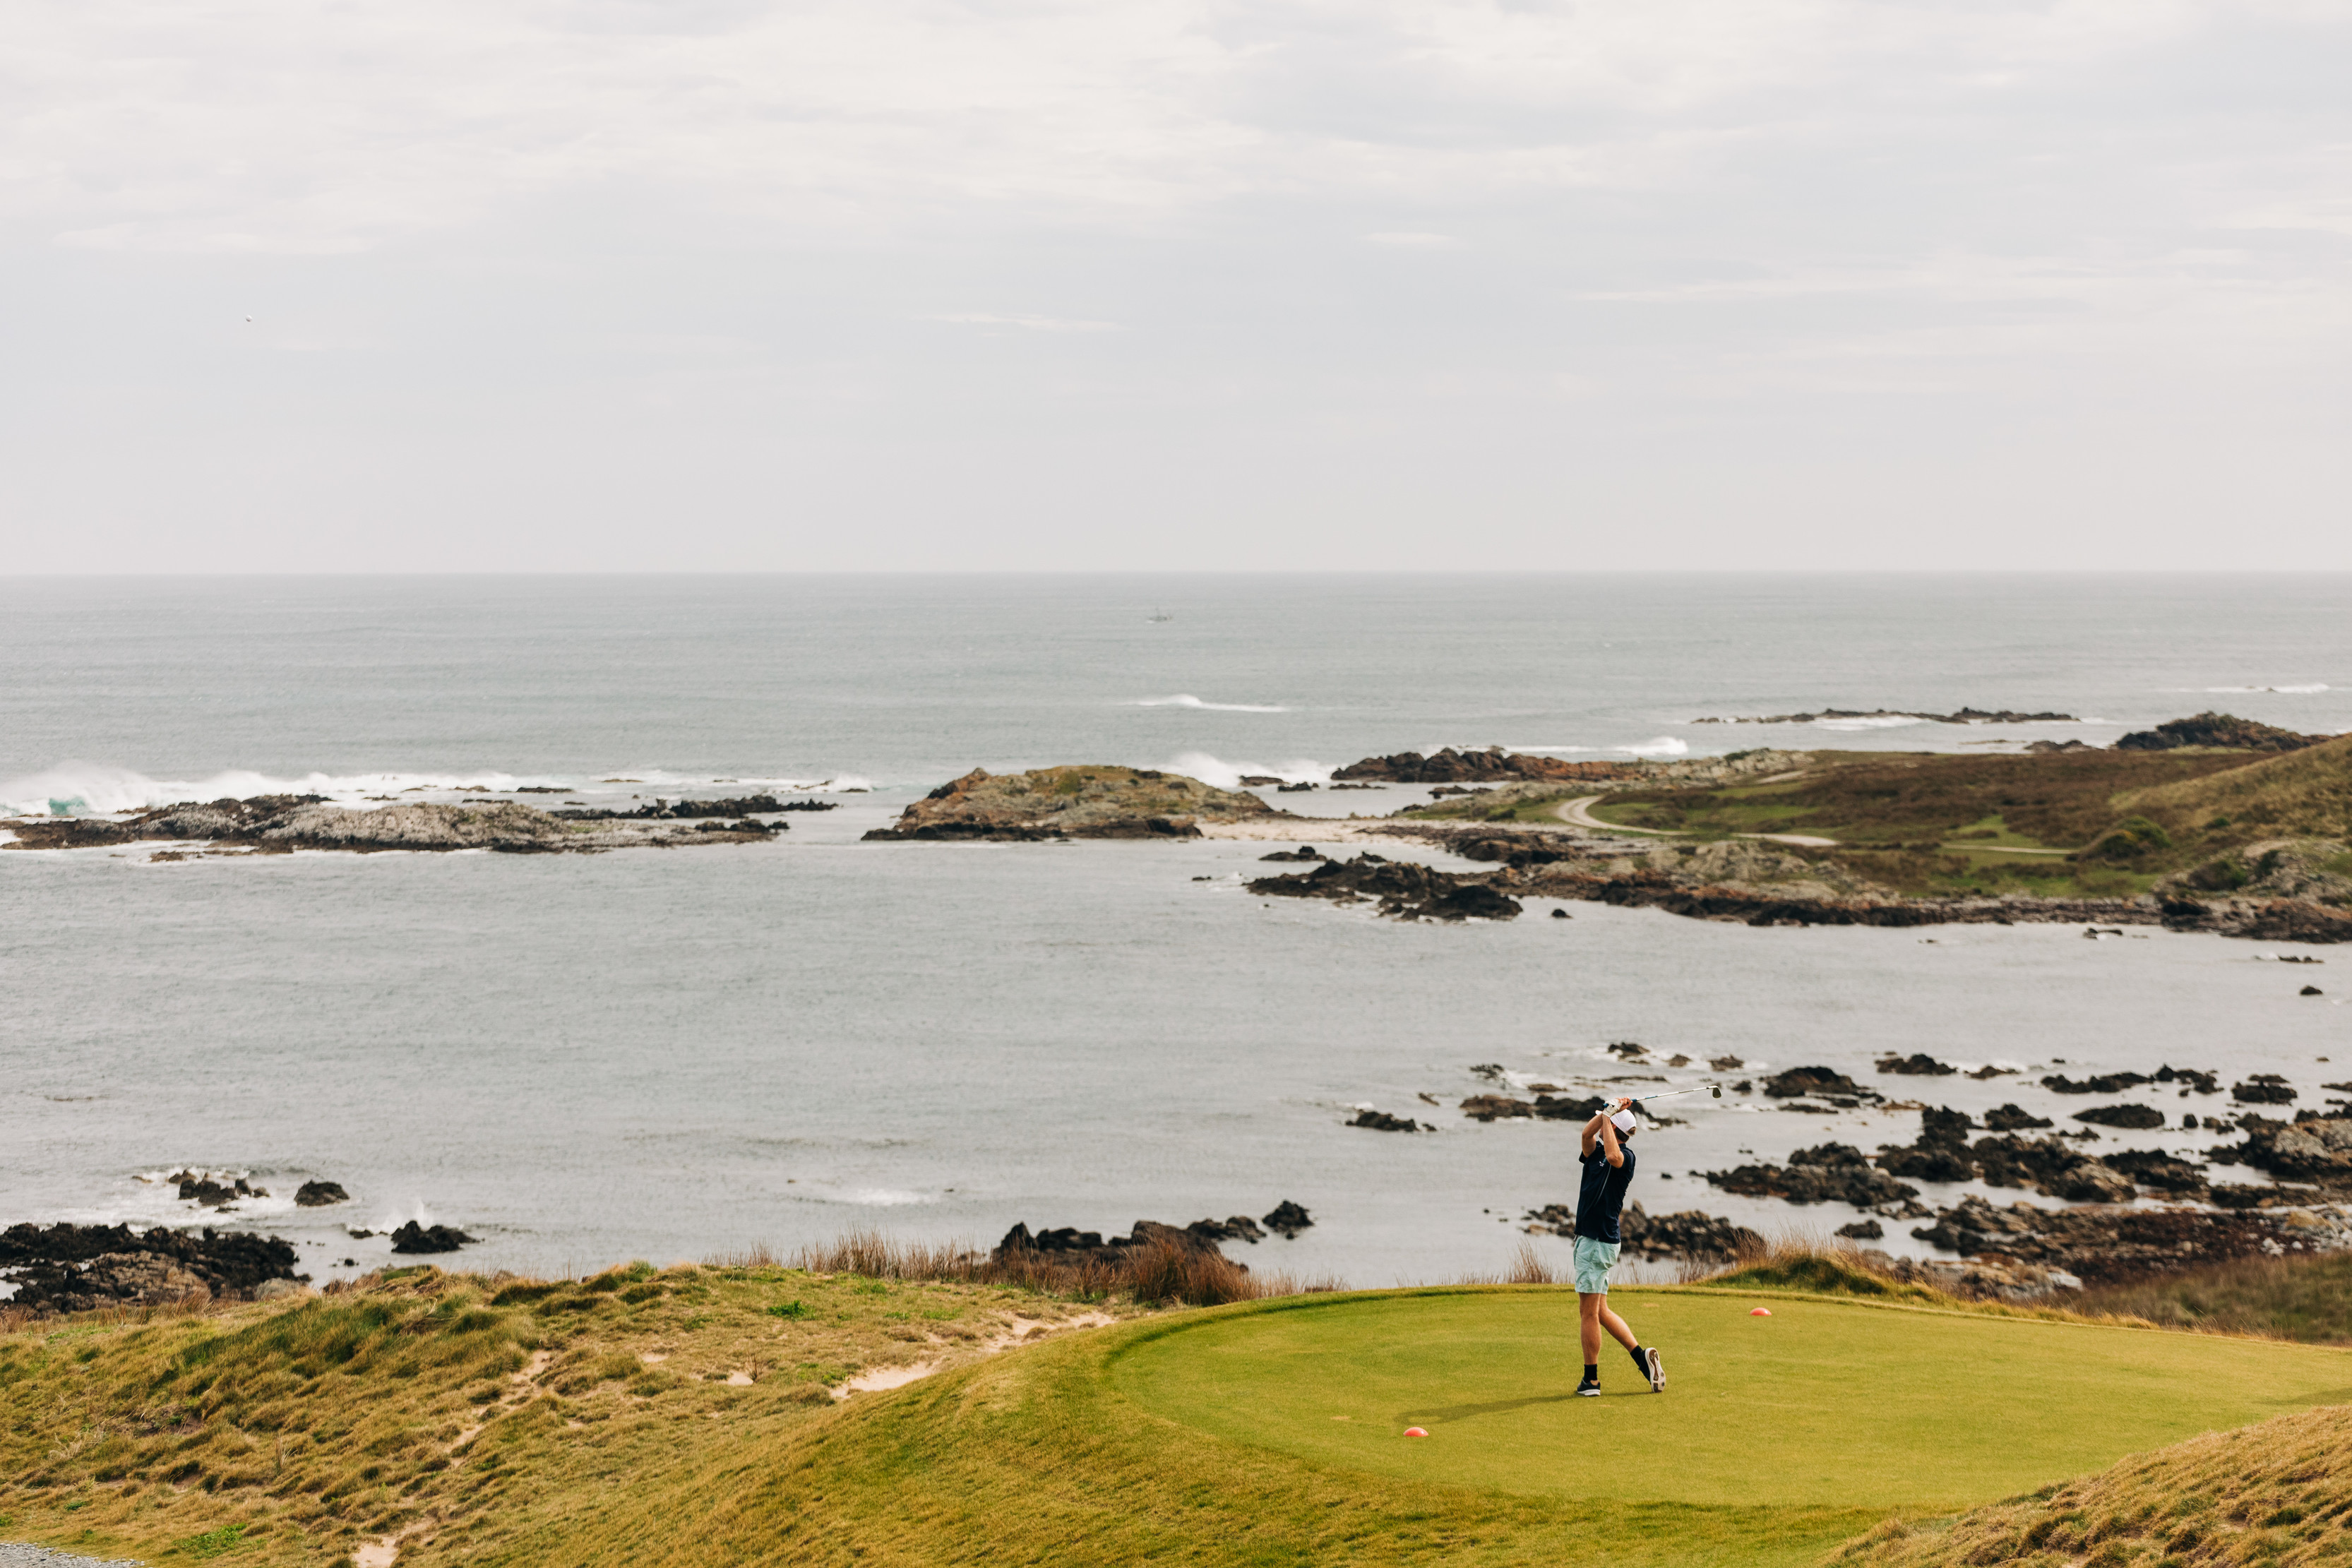 Person swinging the golf club on the turf, surrounded by incredible scenes of rock, hills and ocean, beside the Great Southern Ocean.